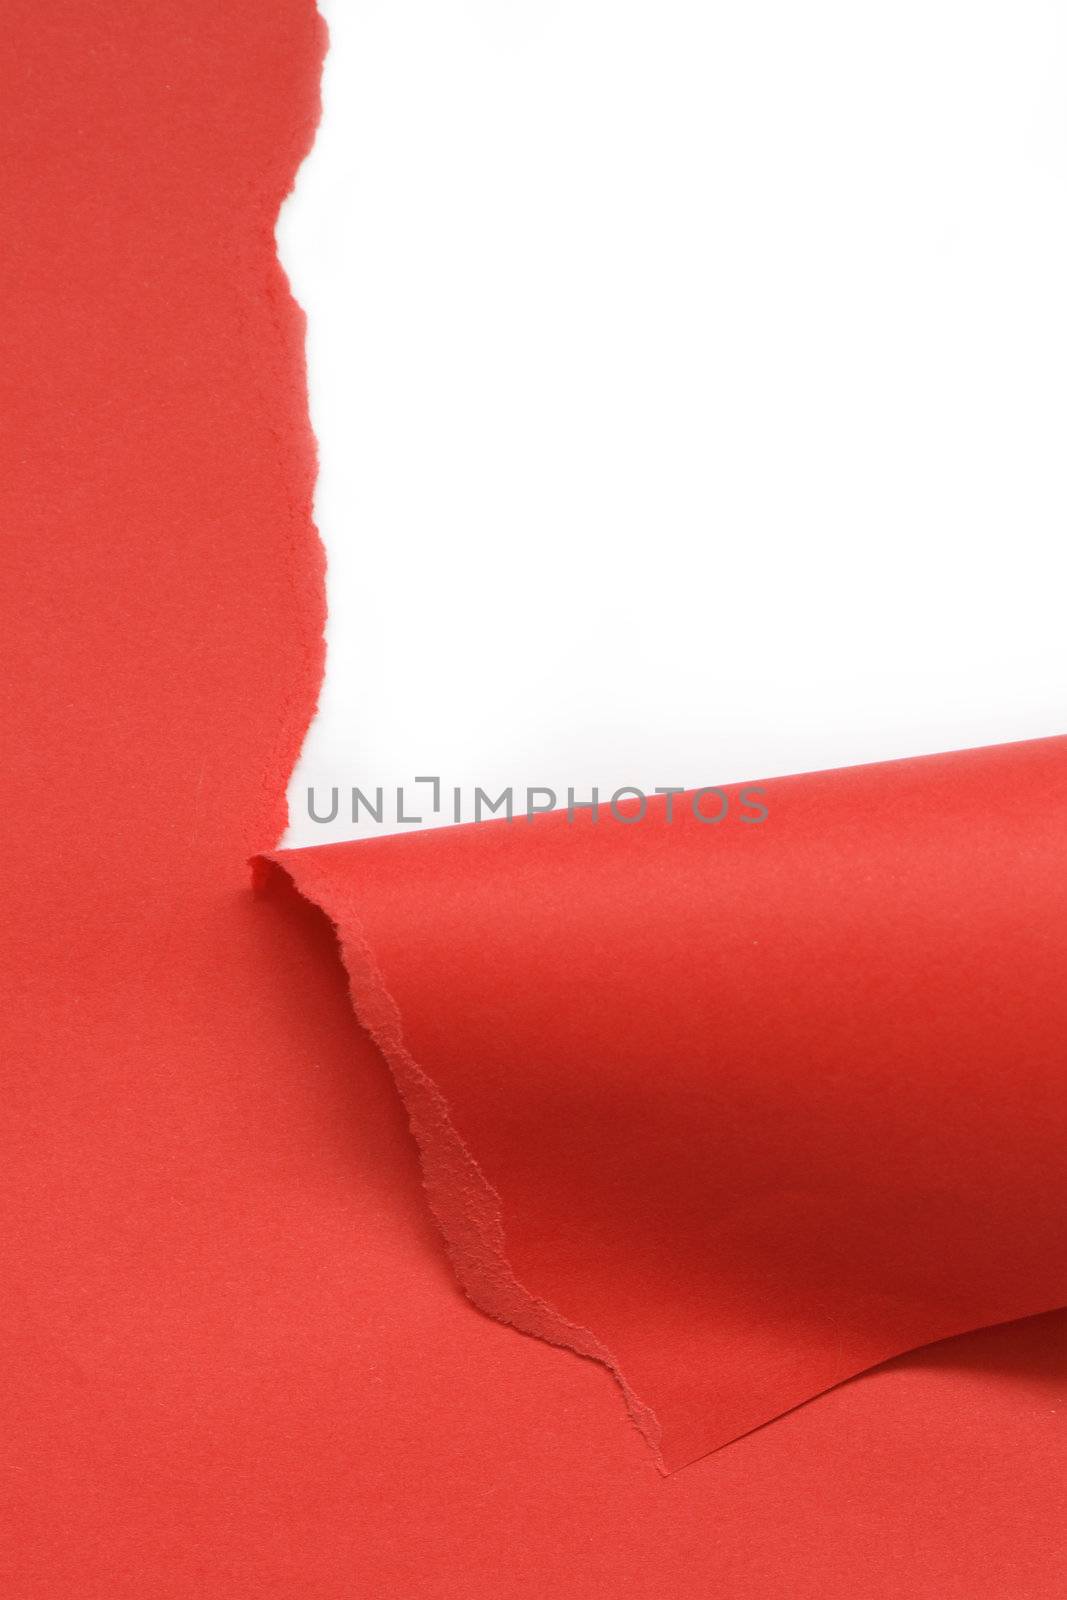 Abstract background made from disrupt red paper sheet. Image with blank white copy space